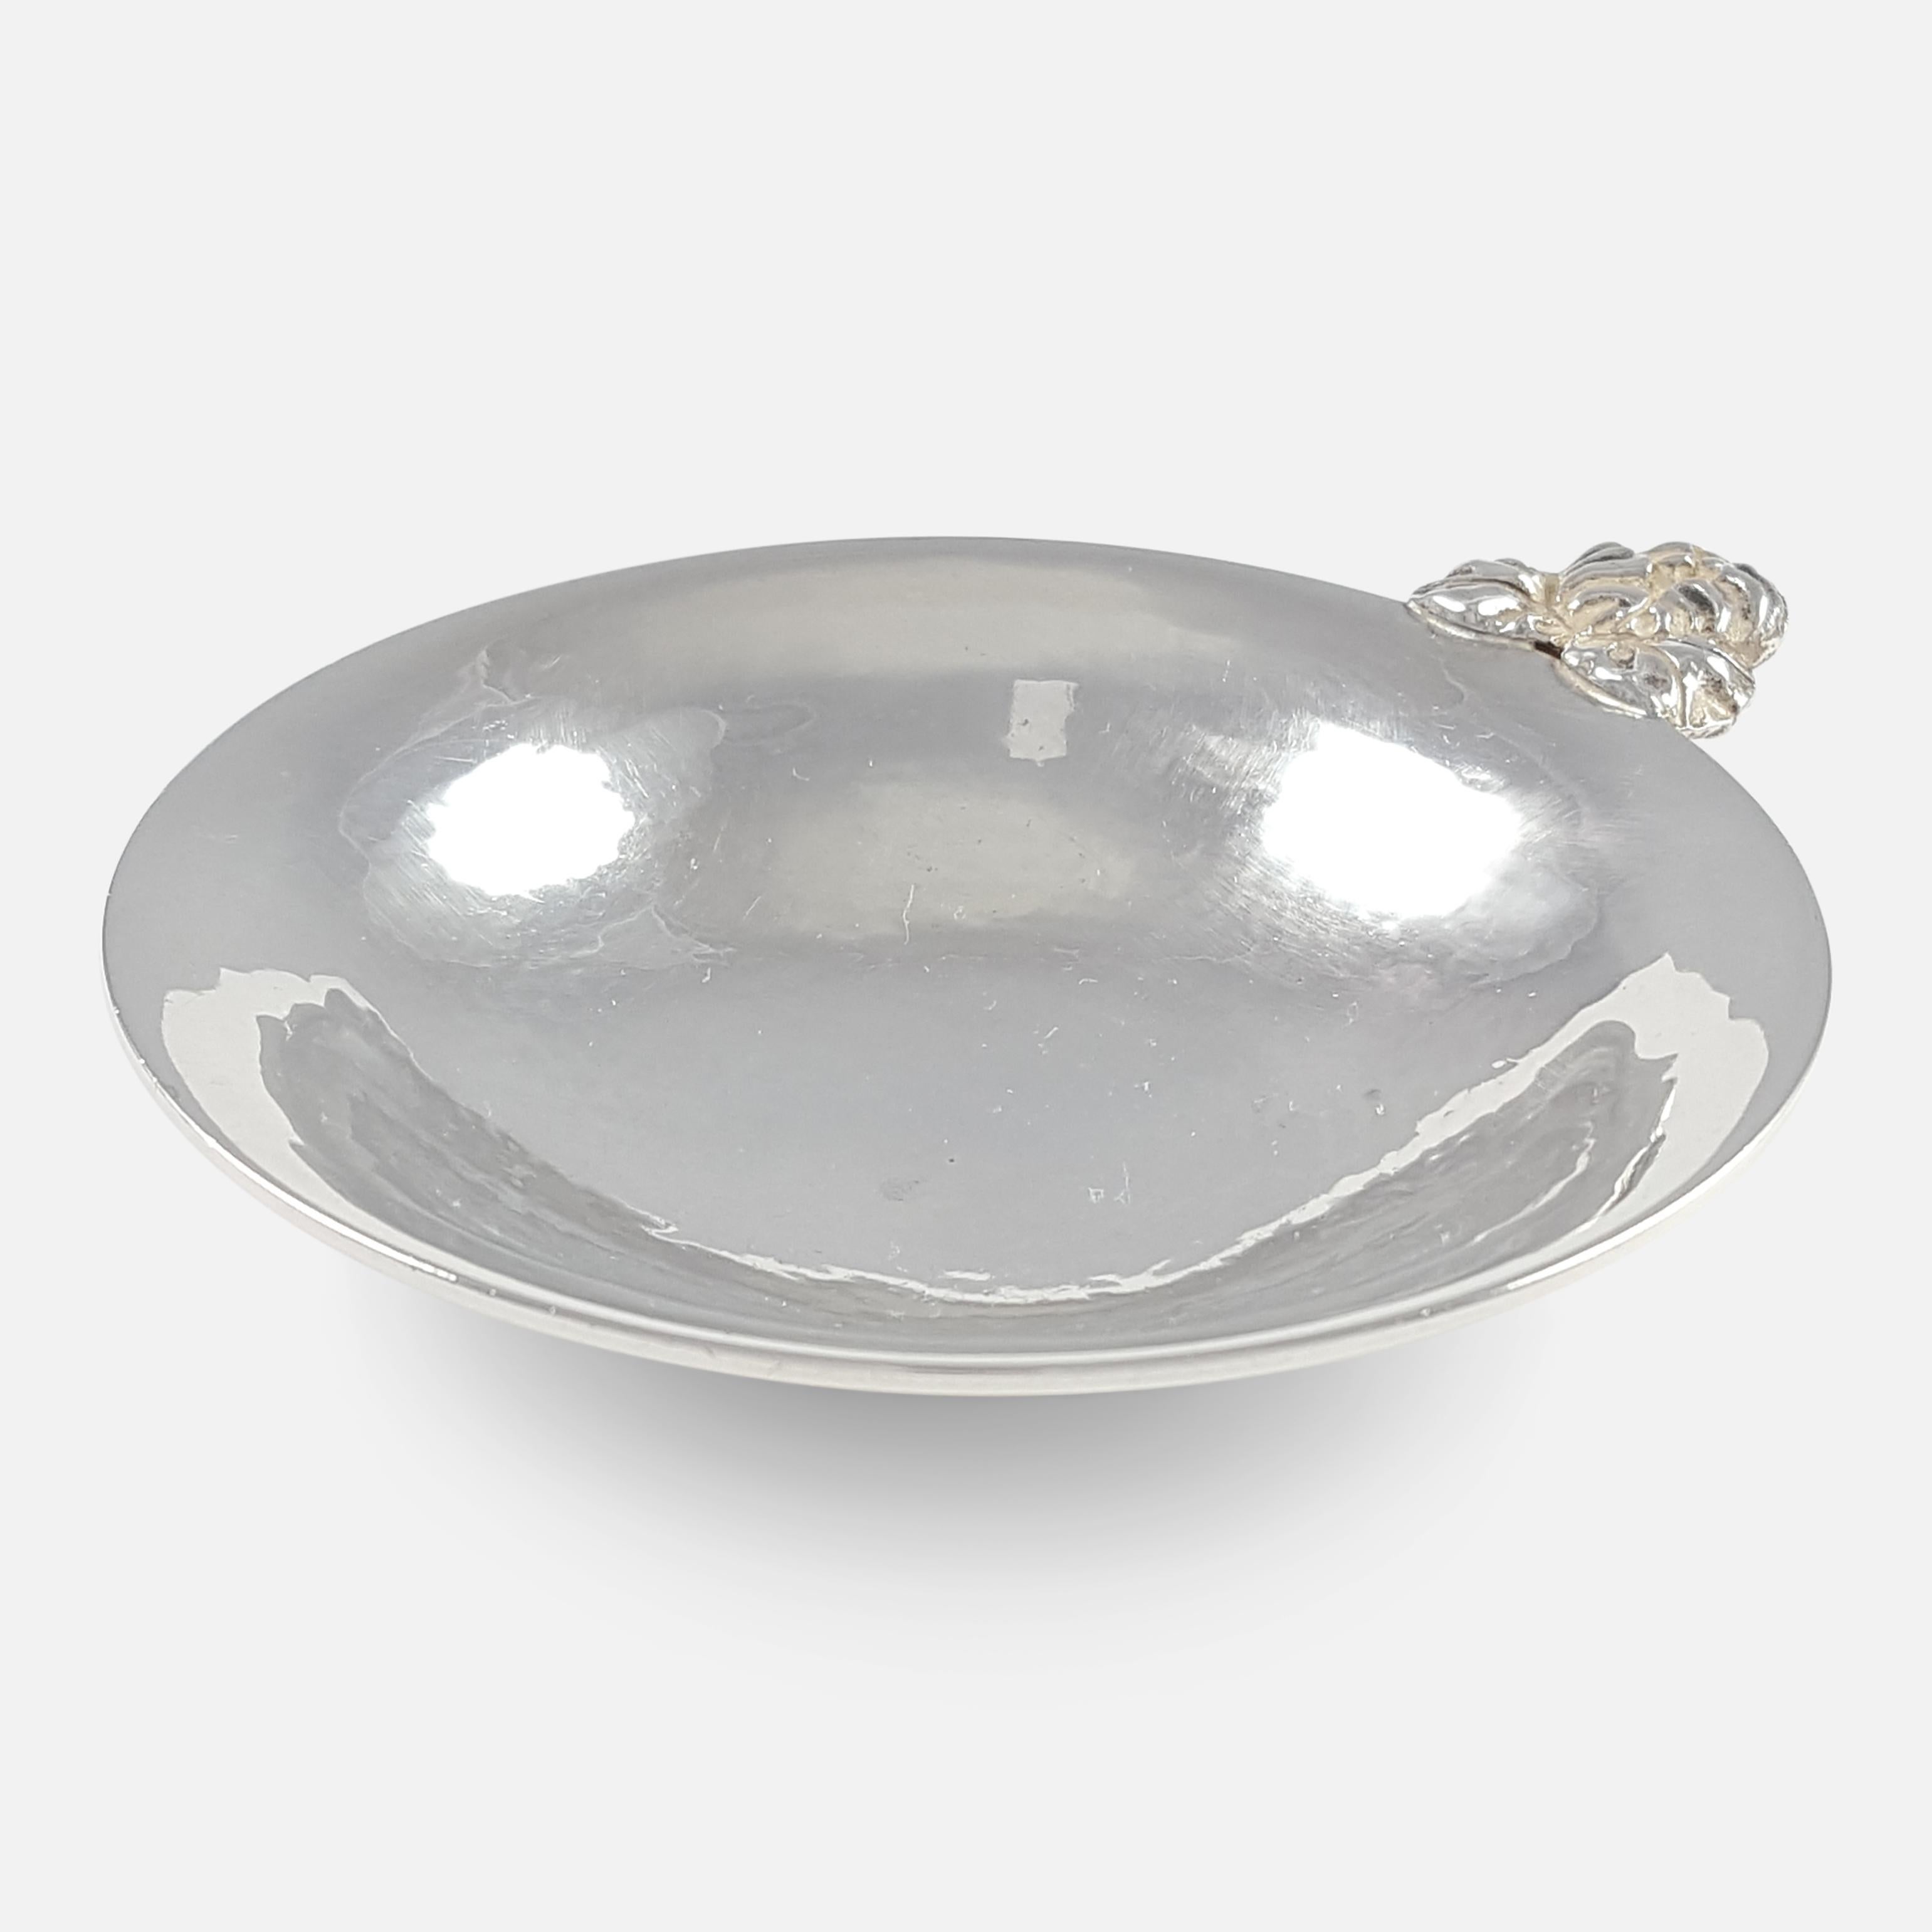 A George VI sterling silver wine taster with London hallmarks, and by Charles Boyton with facsimile signature. The surface of the bowl has a hammered finish, sitting on a circular base.

Assay: - .925 (Sterling Silver).

Date: -